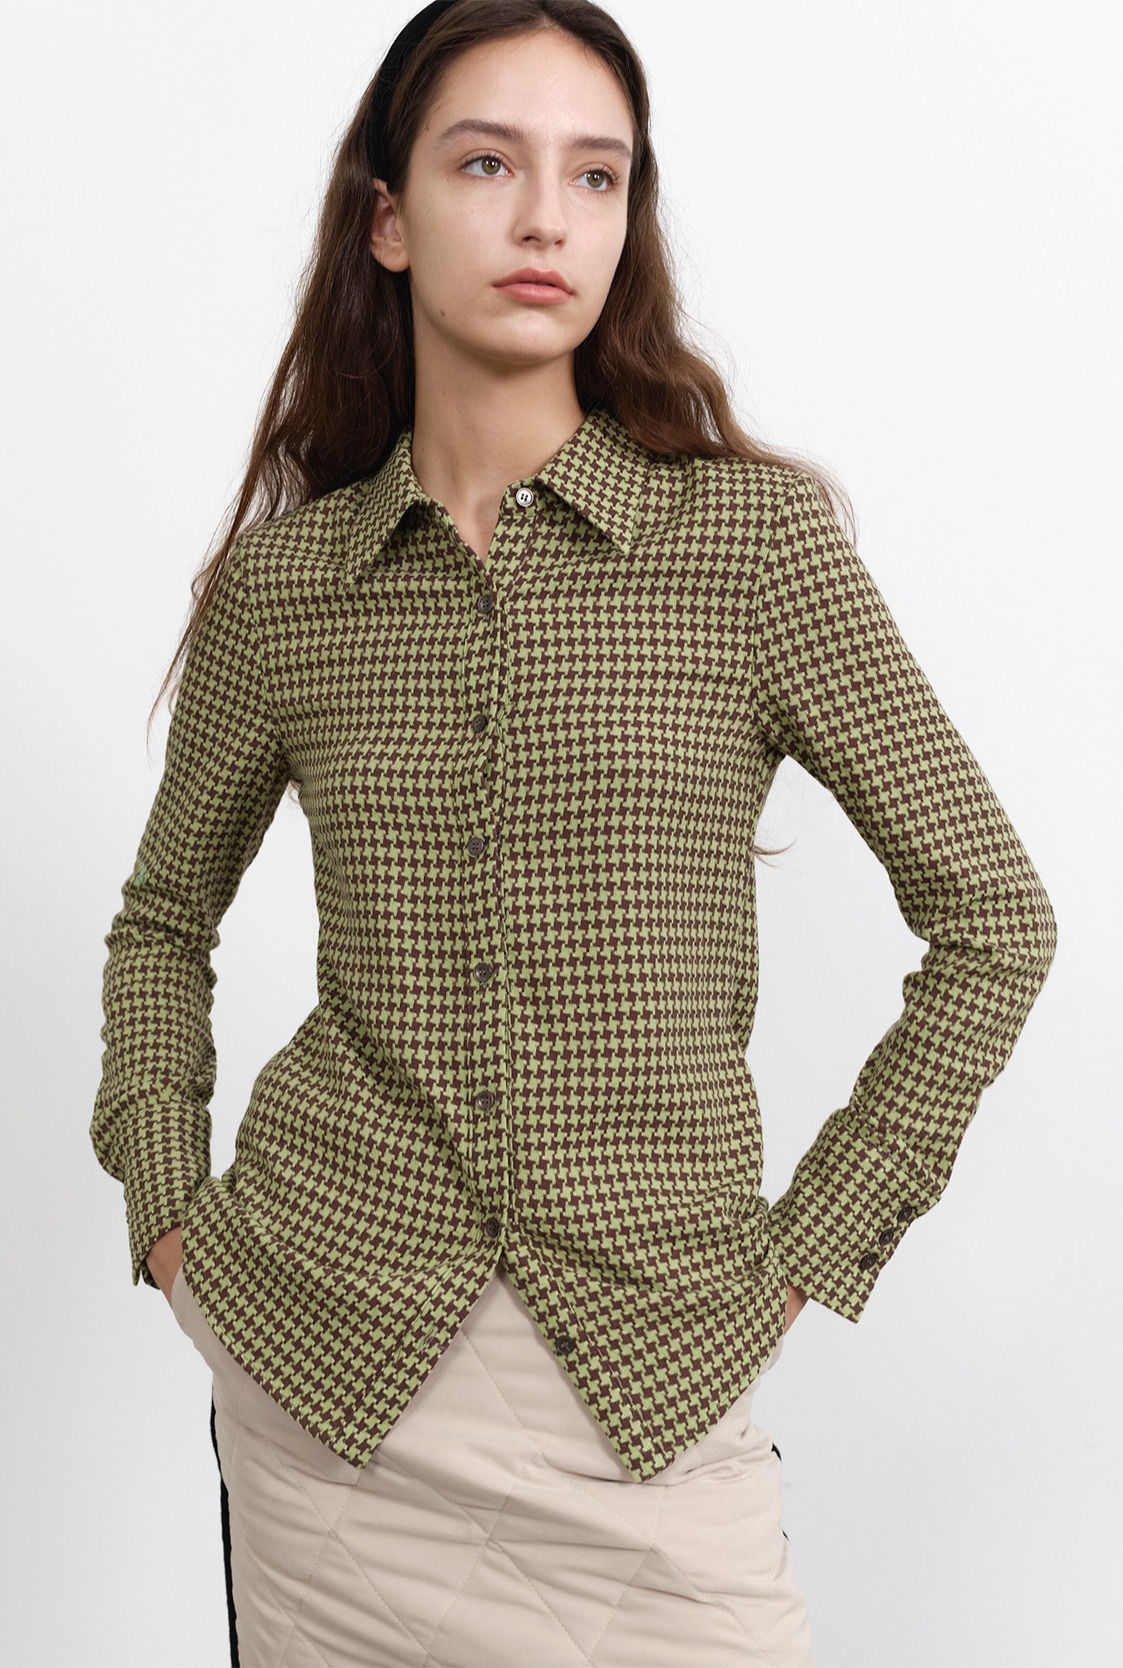 R HOUND TOOTH CHECK SHIRT_BROWN